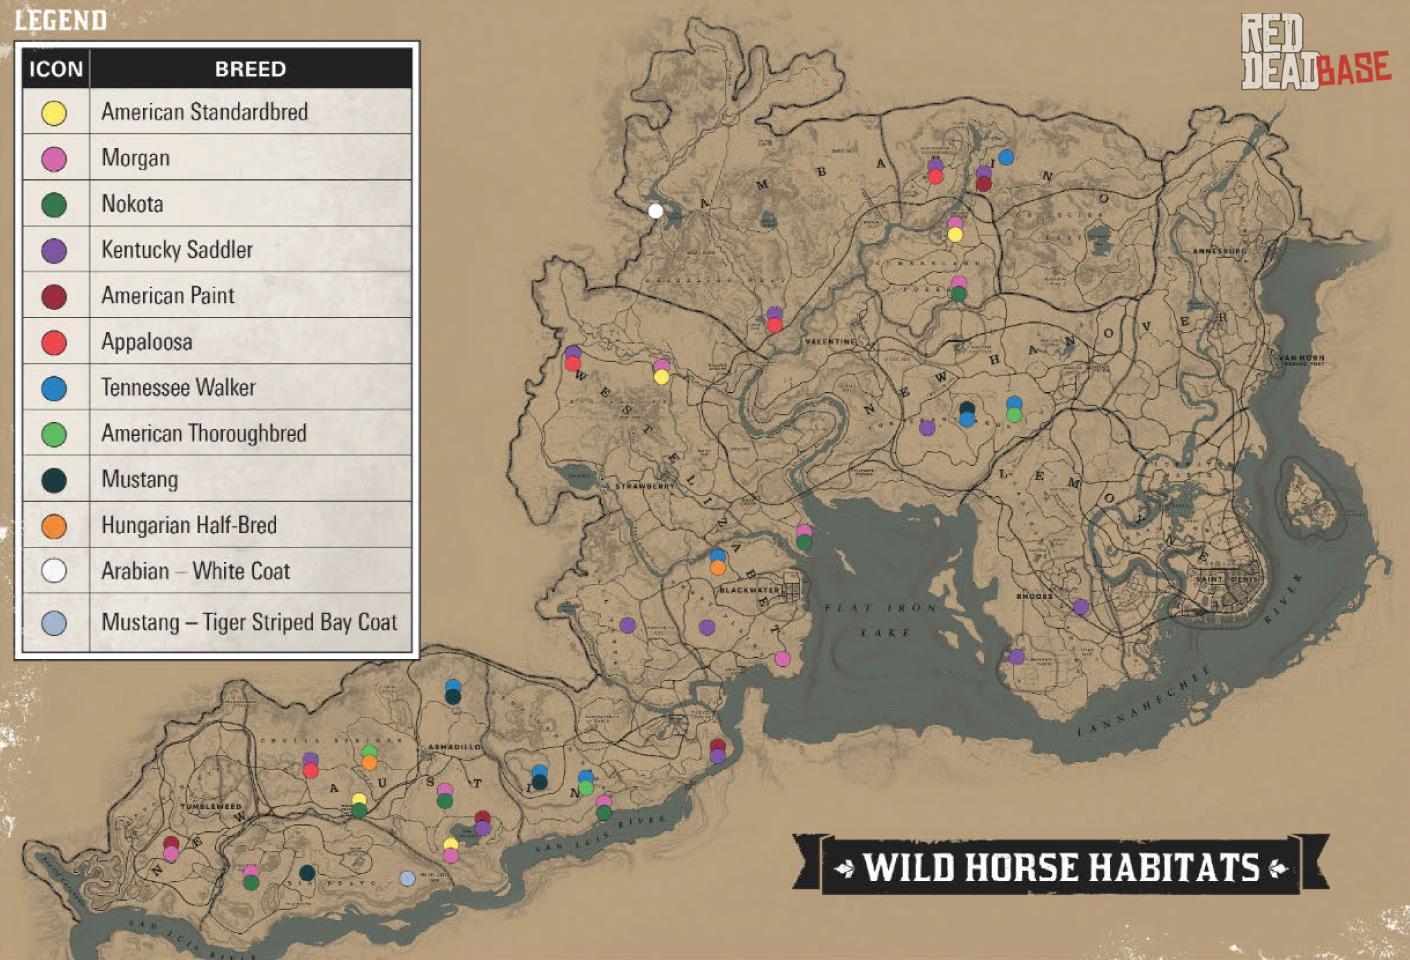 Hungarian Halfbred - Map Location in RDR2